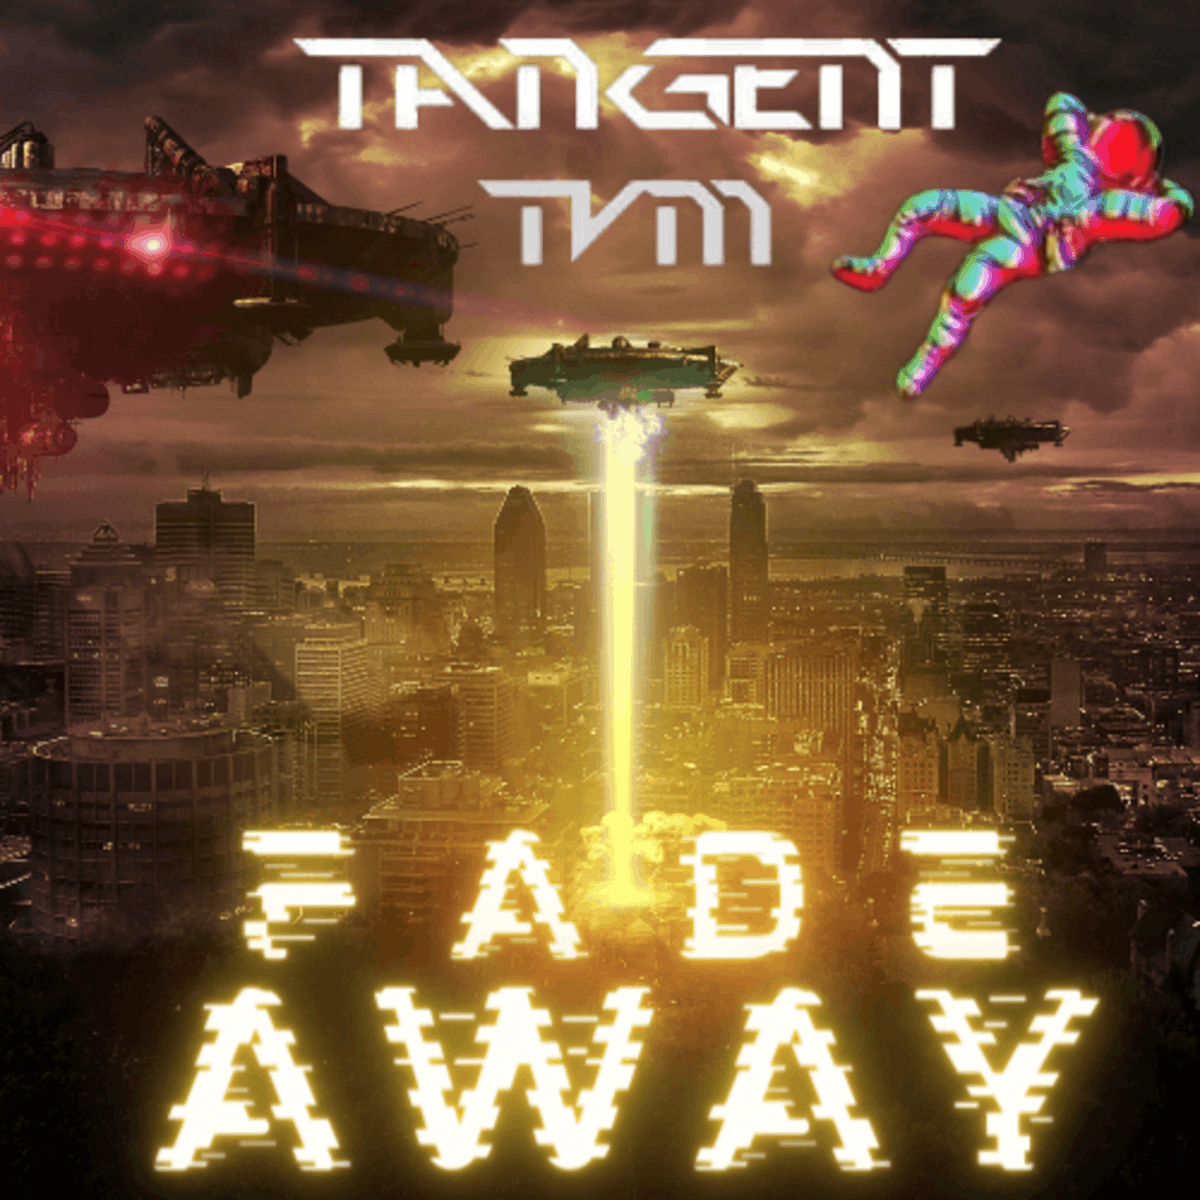 lowlightcreative.com Official artwork for my clients upcoming song. Please reach out if you need any creative work done. #tangenttvm #lowlightcreative #creativeagency #fadeaway